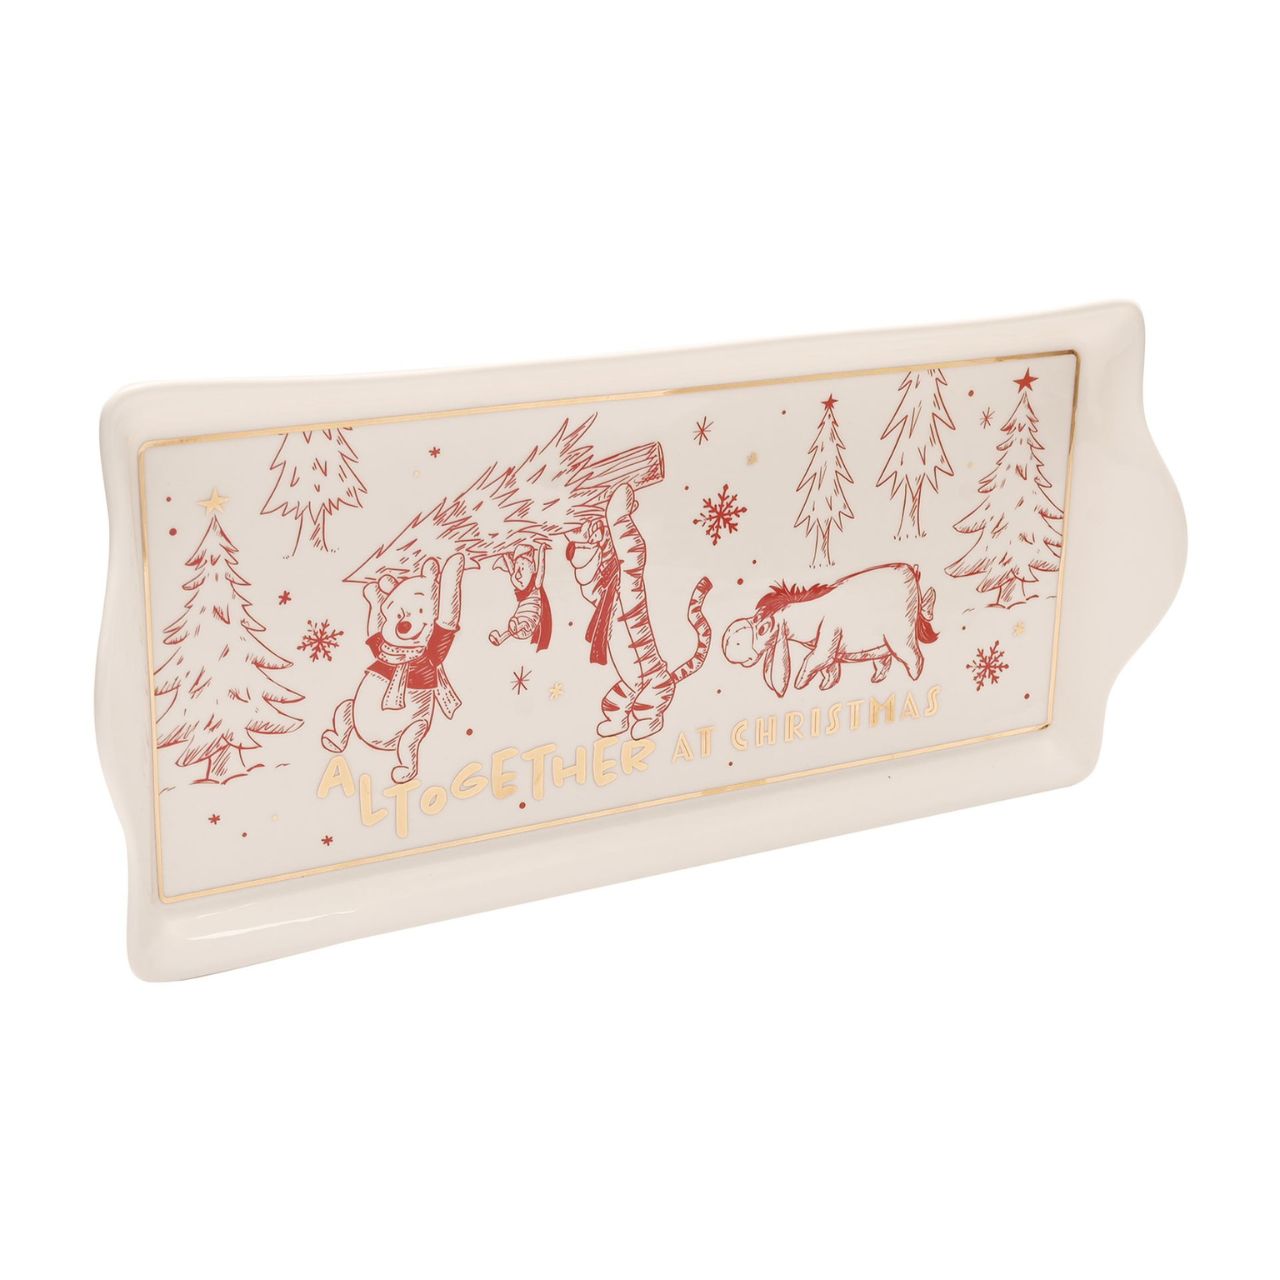 Disney Winnie the Pooh Christmas Rectangle Serving Plate  This serving plate would make a fun and festive addition to any Christmas party this year. With delightful illustrations of the most recognisable Winnie the Pooh characters, this serving plate is sure to bring smiles to guest's faces.